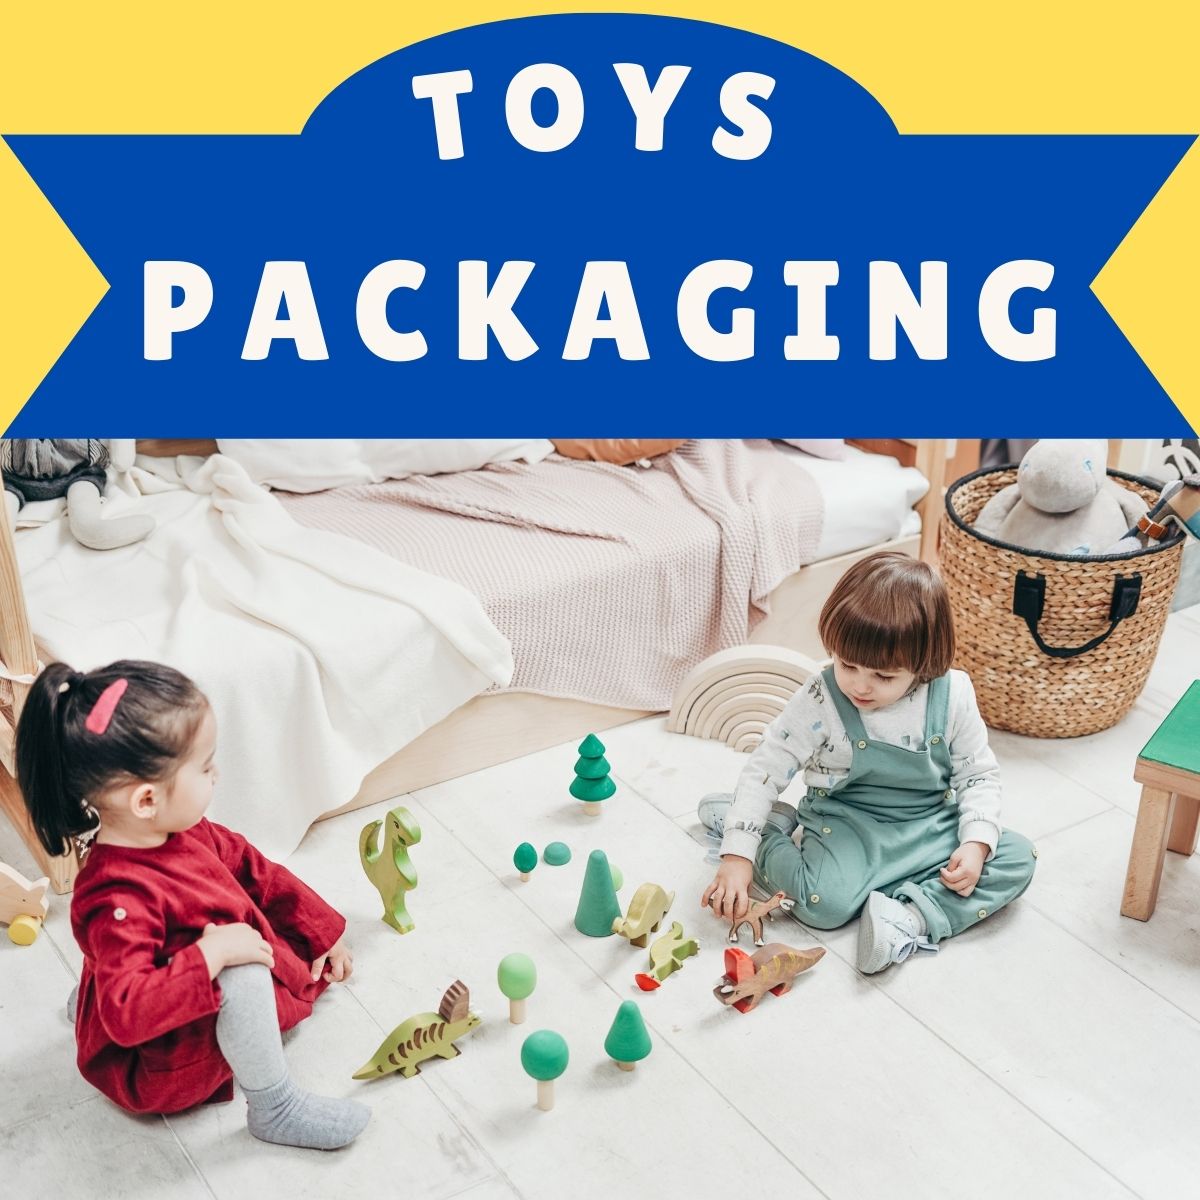 The Secret Life of Toys Why Packaging Matters More Than You Think